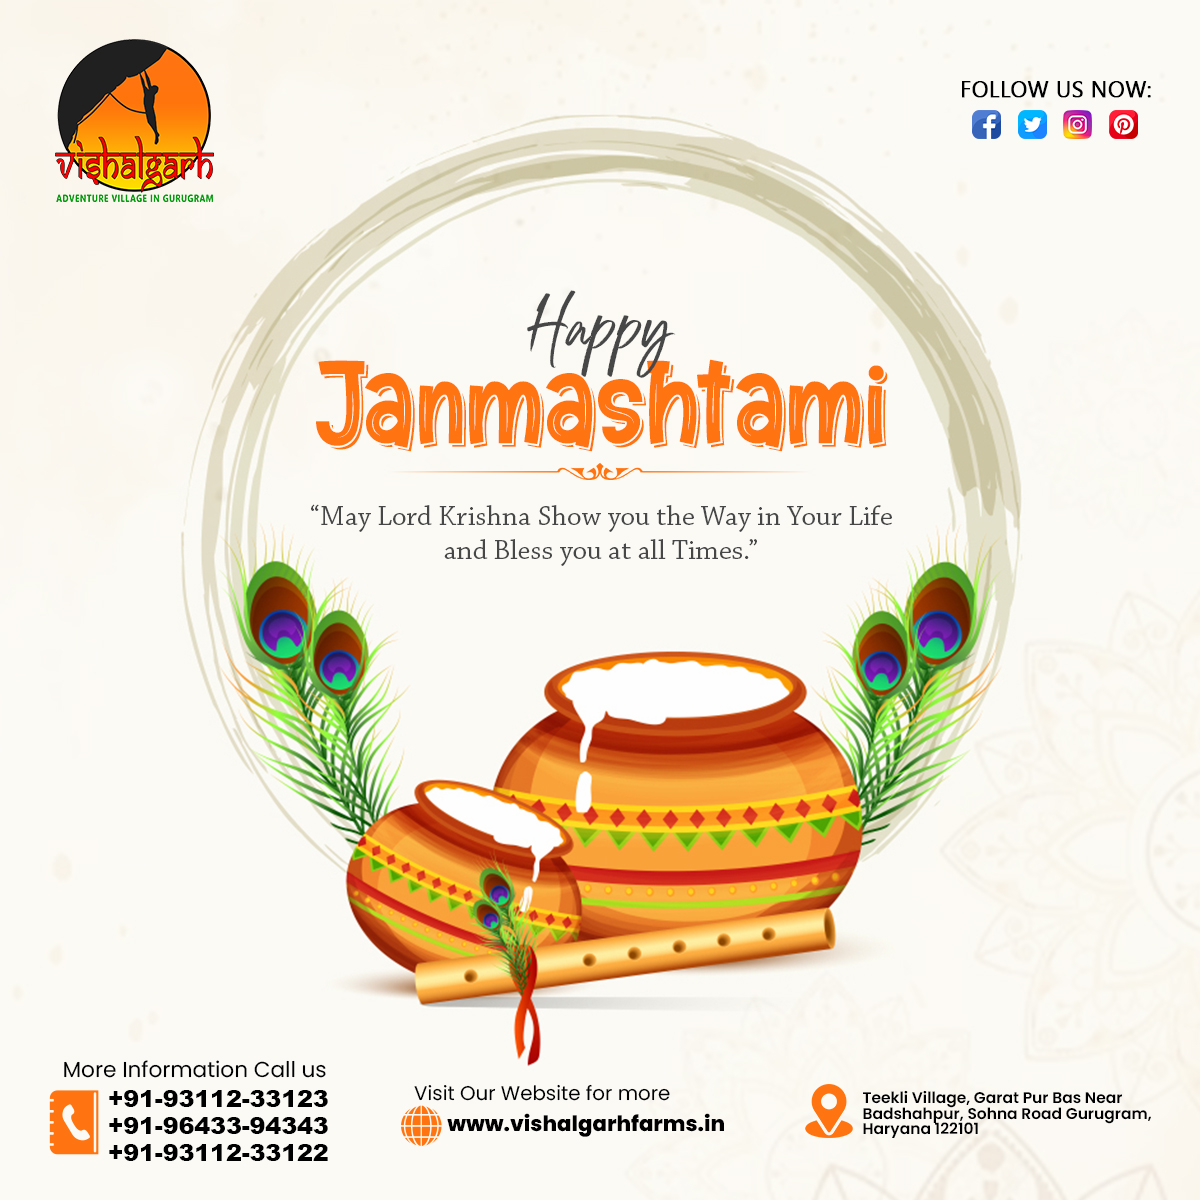 🎉 Happy Janmashtami from Vishalgarh Farms! 🌾🙏
On this divine occasion, let's immerse ourselves in the enchanting melodies of Lord Krishna's flute and seek his blessings. 

#Janmashtami2023 #VishalgarhFarms #LordKrishna #DivineMelodies #Blessings #JoyfulCelebration 🥳🕉️🎶🌼🕊️